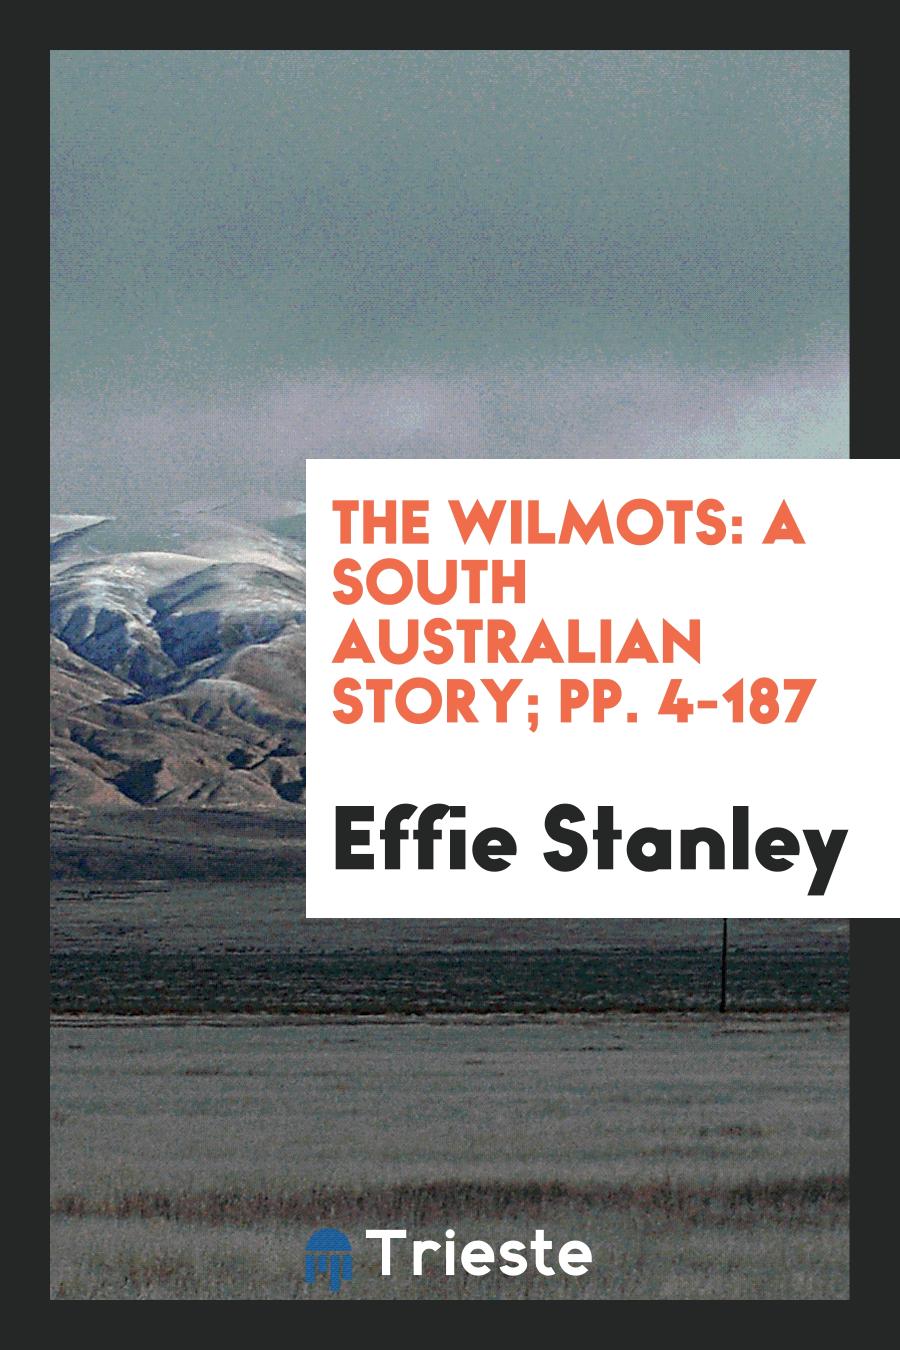 The Wilmots: A South Australian Story; pp. 4-187